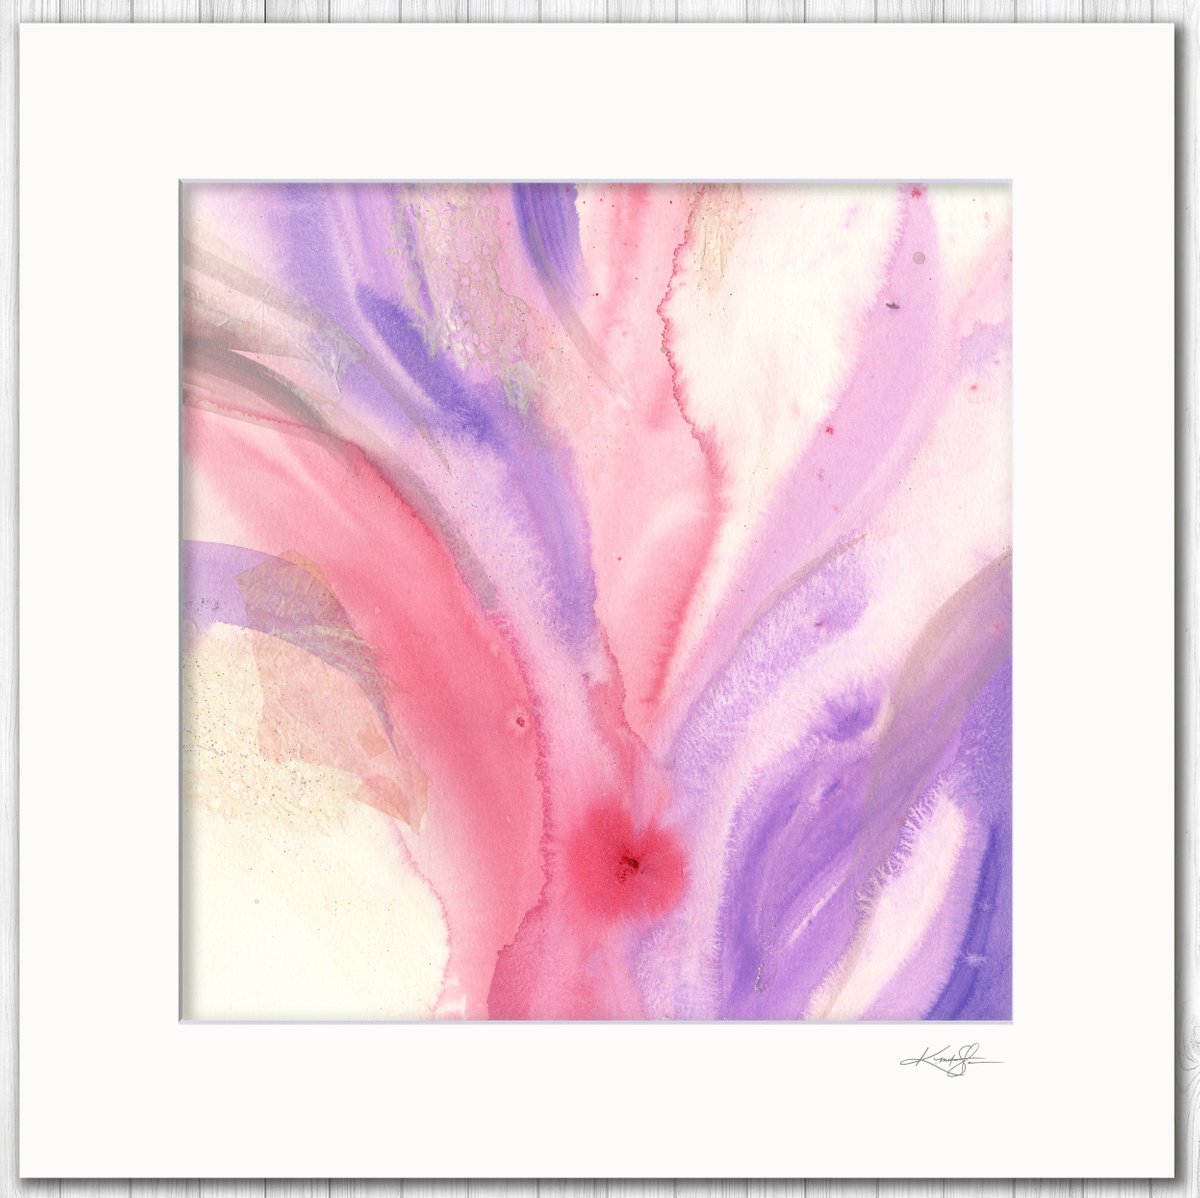 Soul’s Bloom 11 - Spiritual Abstract Floral Painting by Kathy Morton Stanion by Kathy Morton Stanion